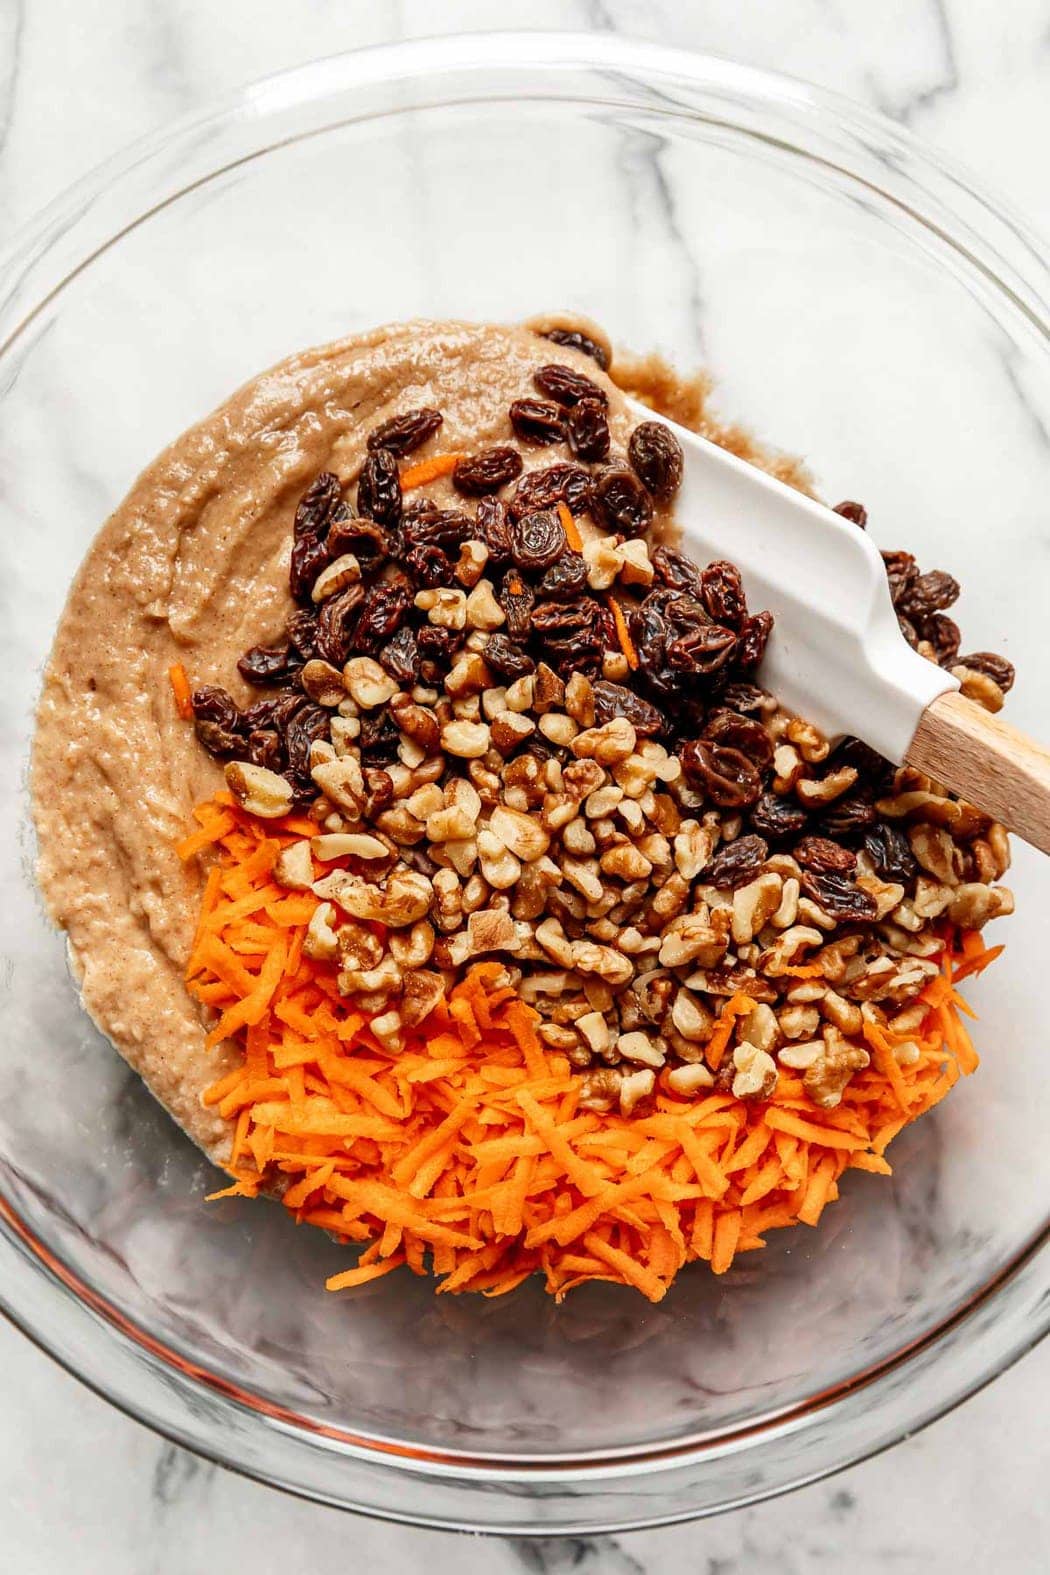 All ingredients for healthy carrot cake in a mixing bowl